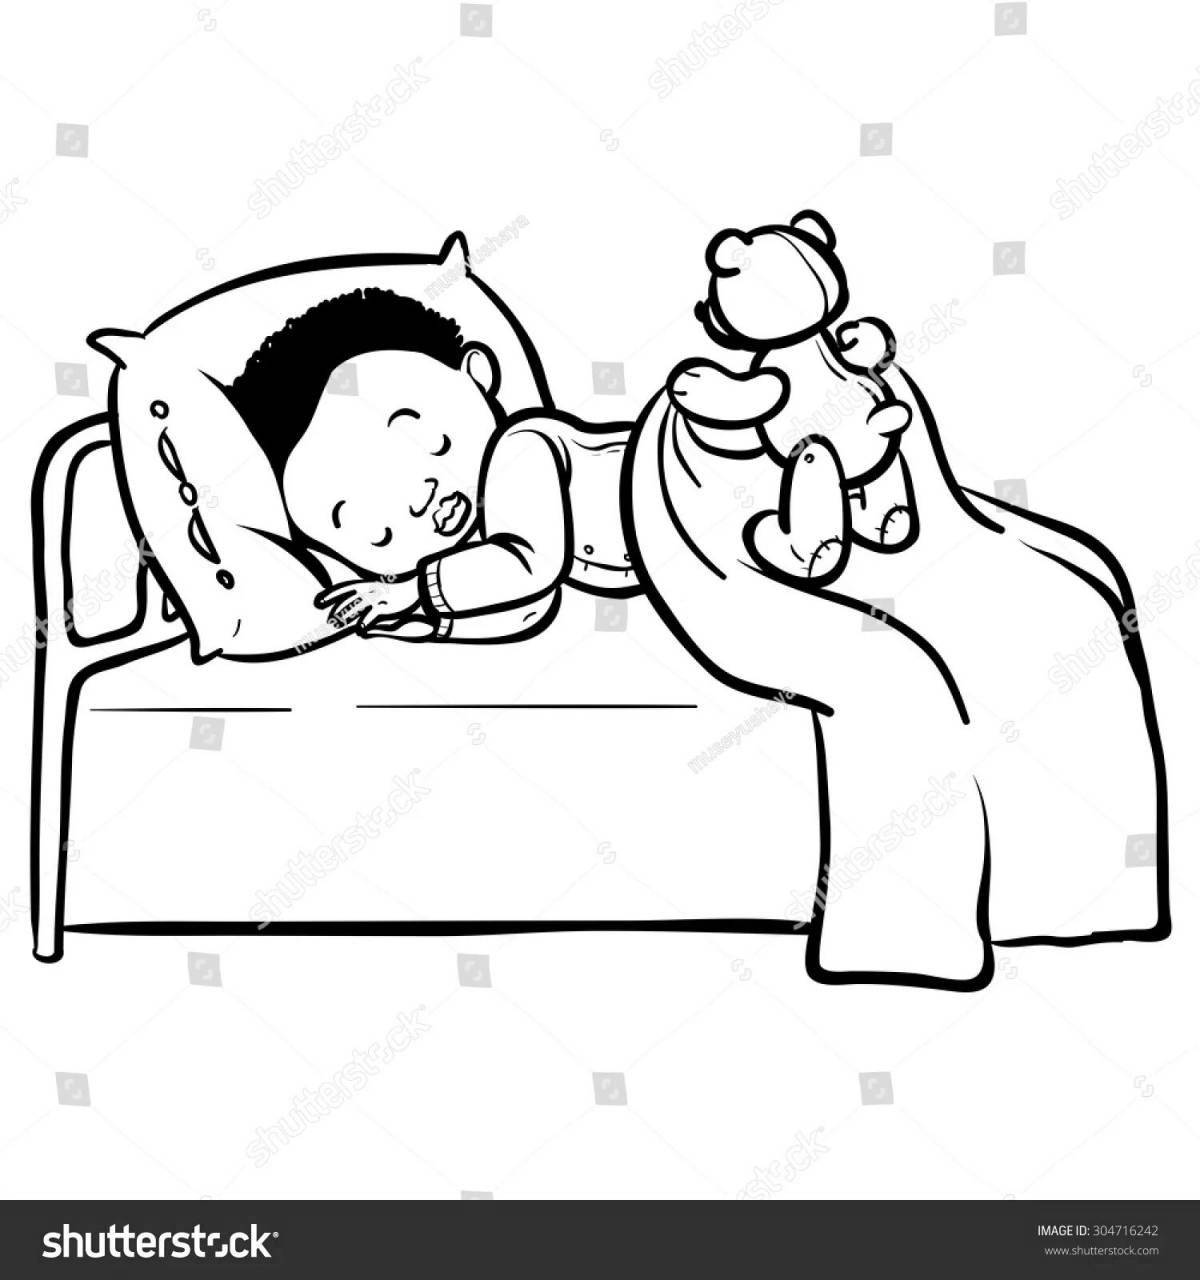 Calm sleeping baby coloring page